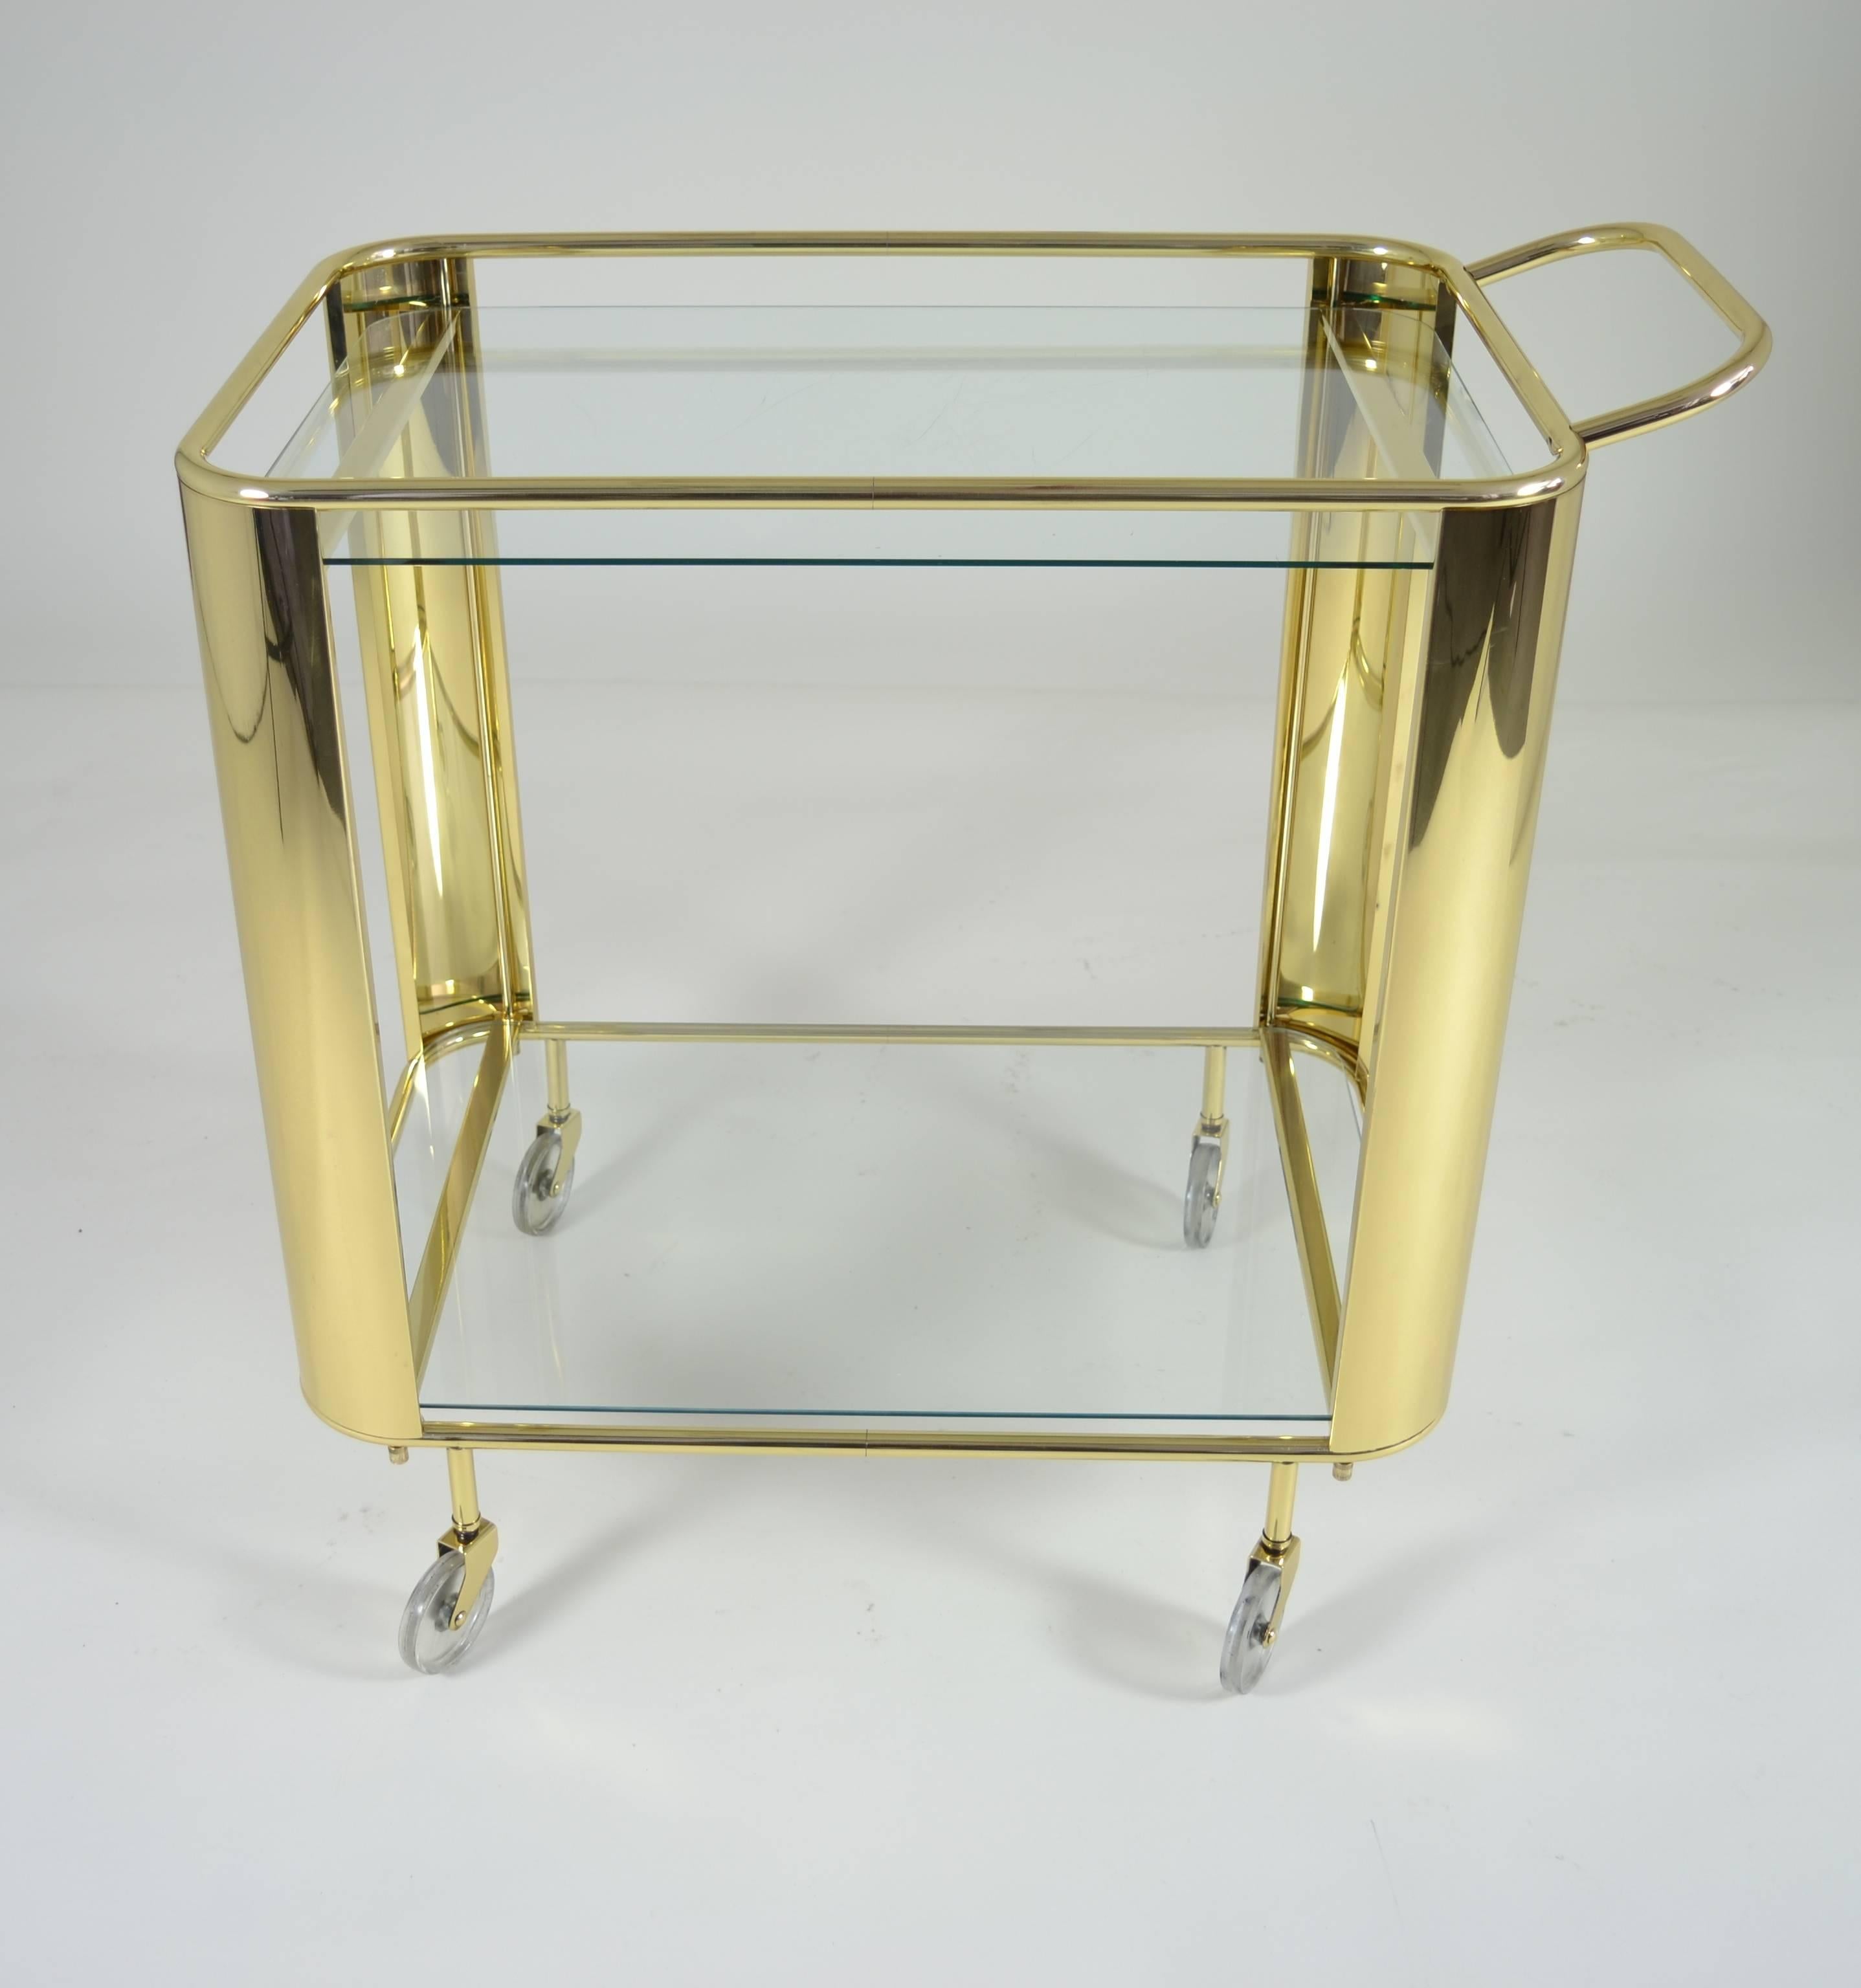 Sleek curves and simple lines, a solid brass cocktail cart with two glass surfaces. Newly polished and lacquered. Great style.